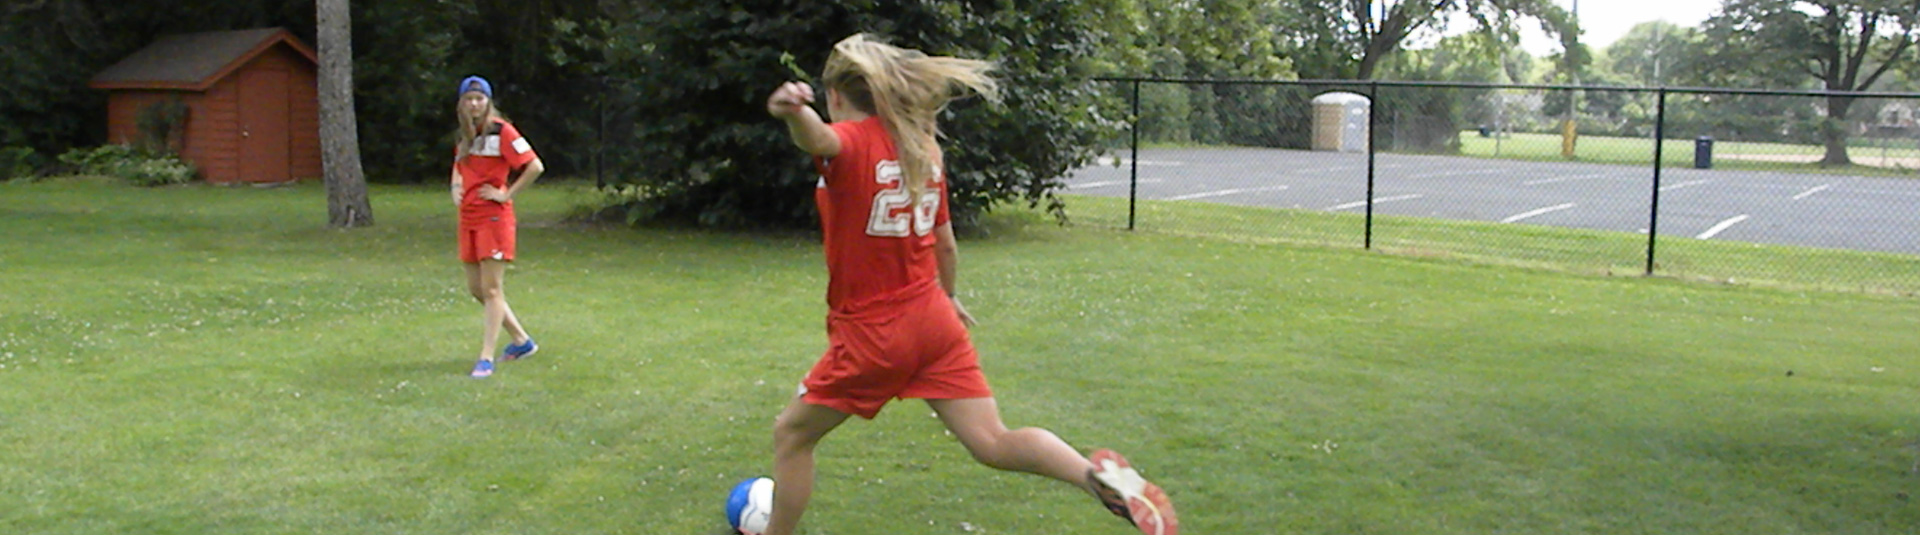 Girls playing soccer in red jersey uniforms